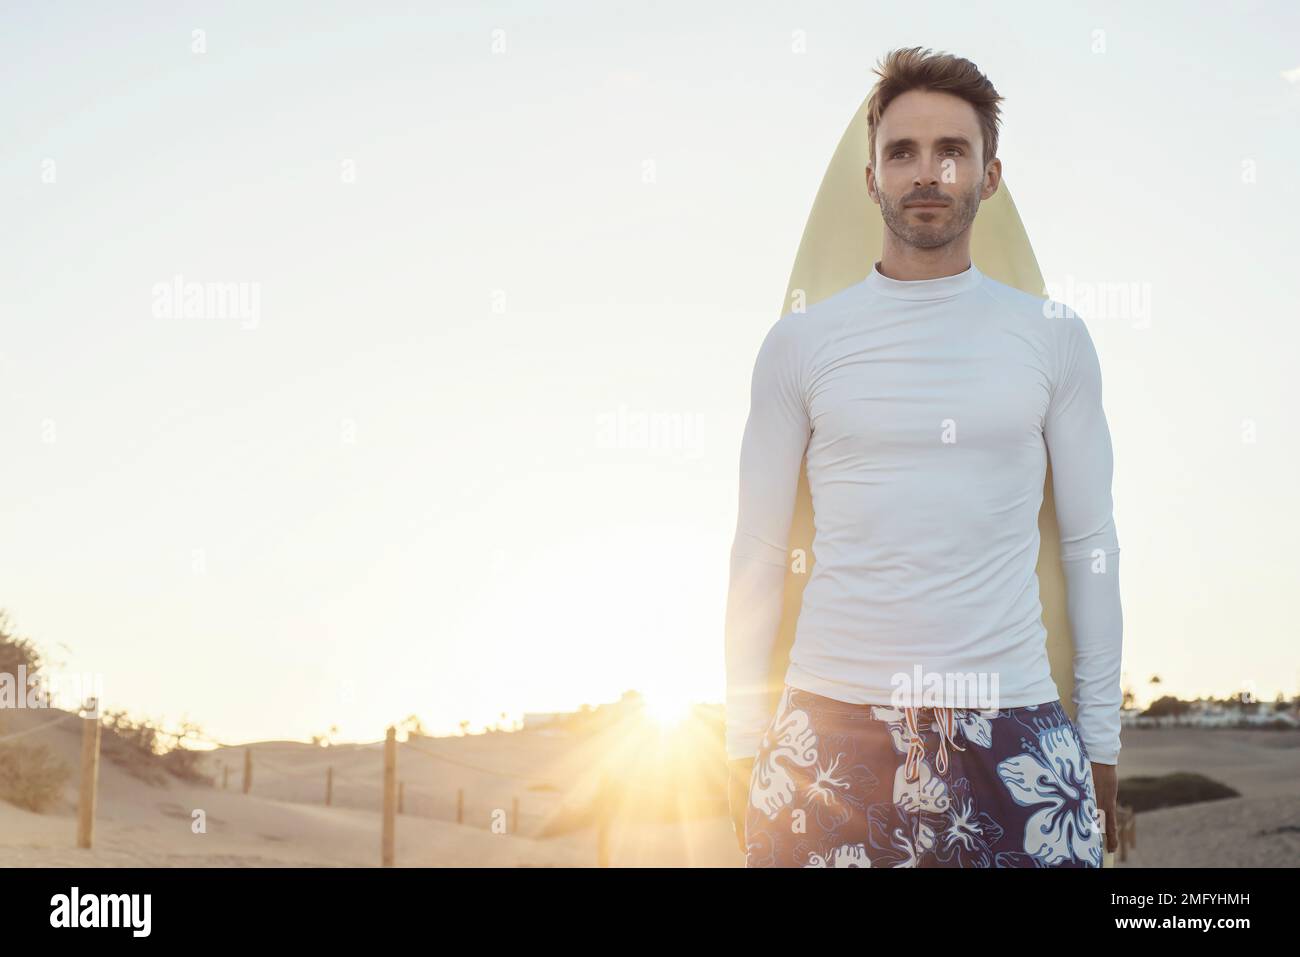 Young handsome surfer guy is standing next to his surfboard and wearing white, empty, blank lycra shirt. Horizontal mock up with sun light flare. Stock Photo